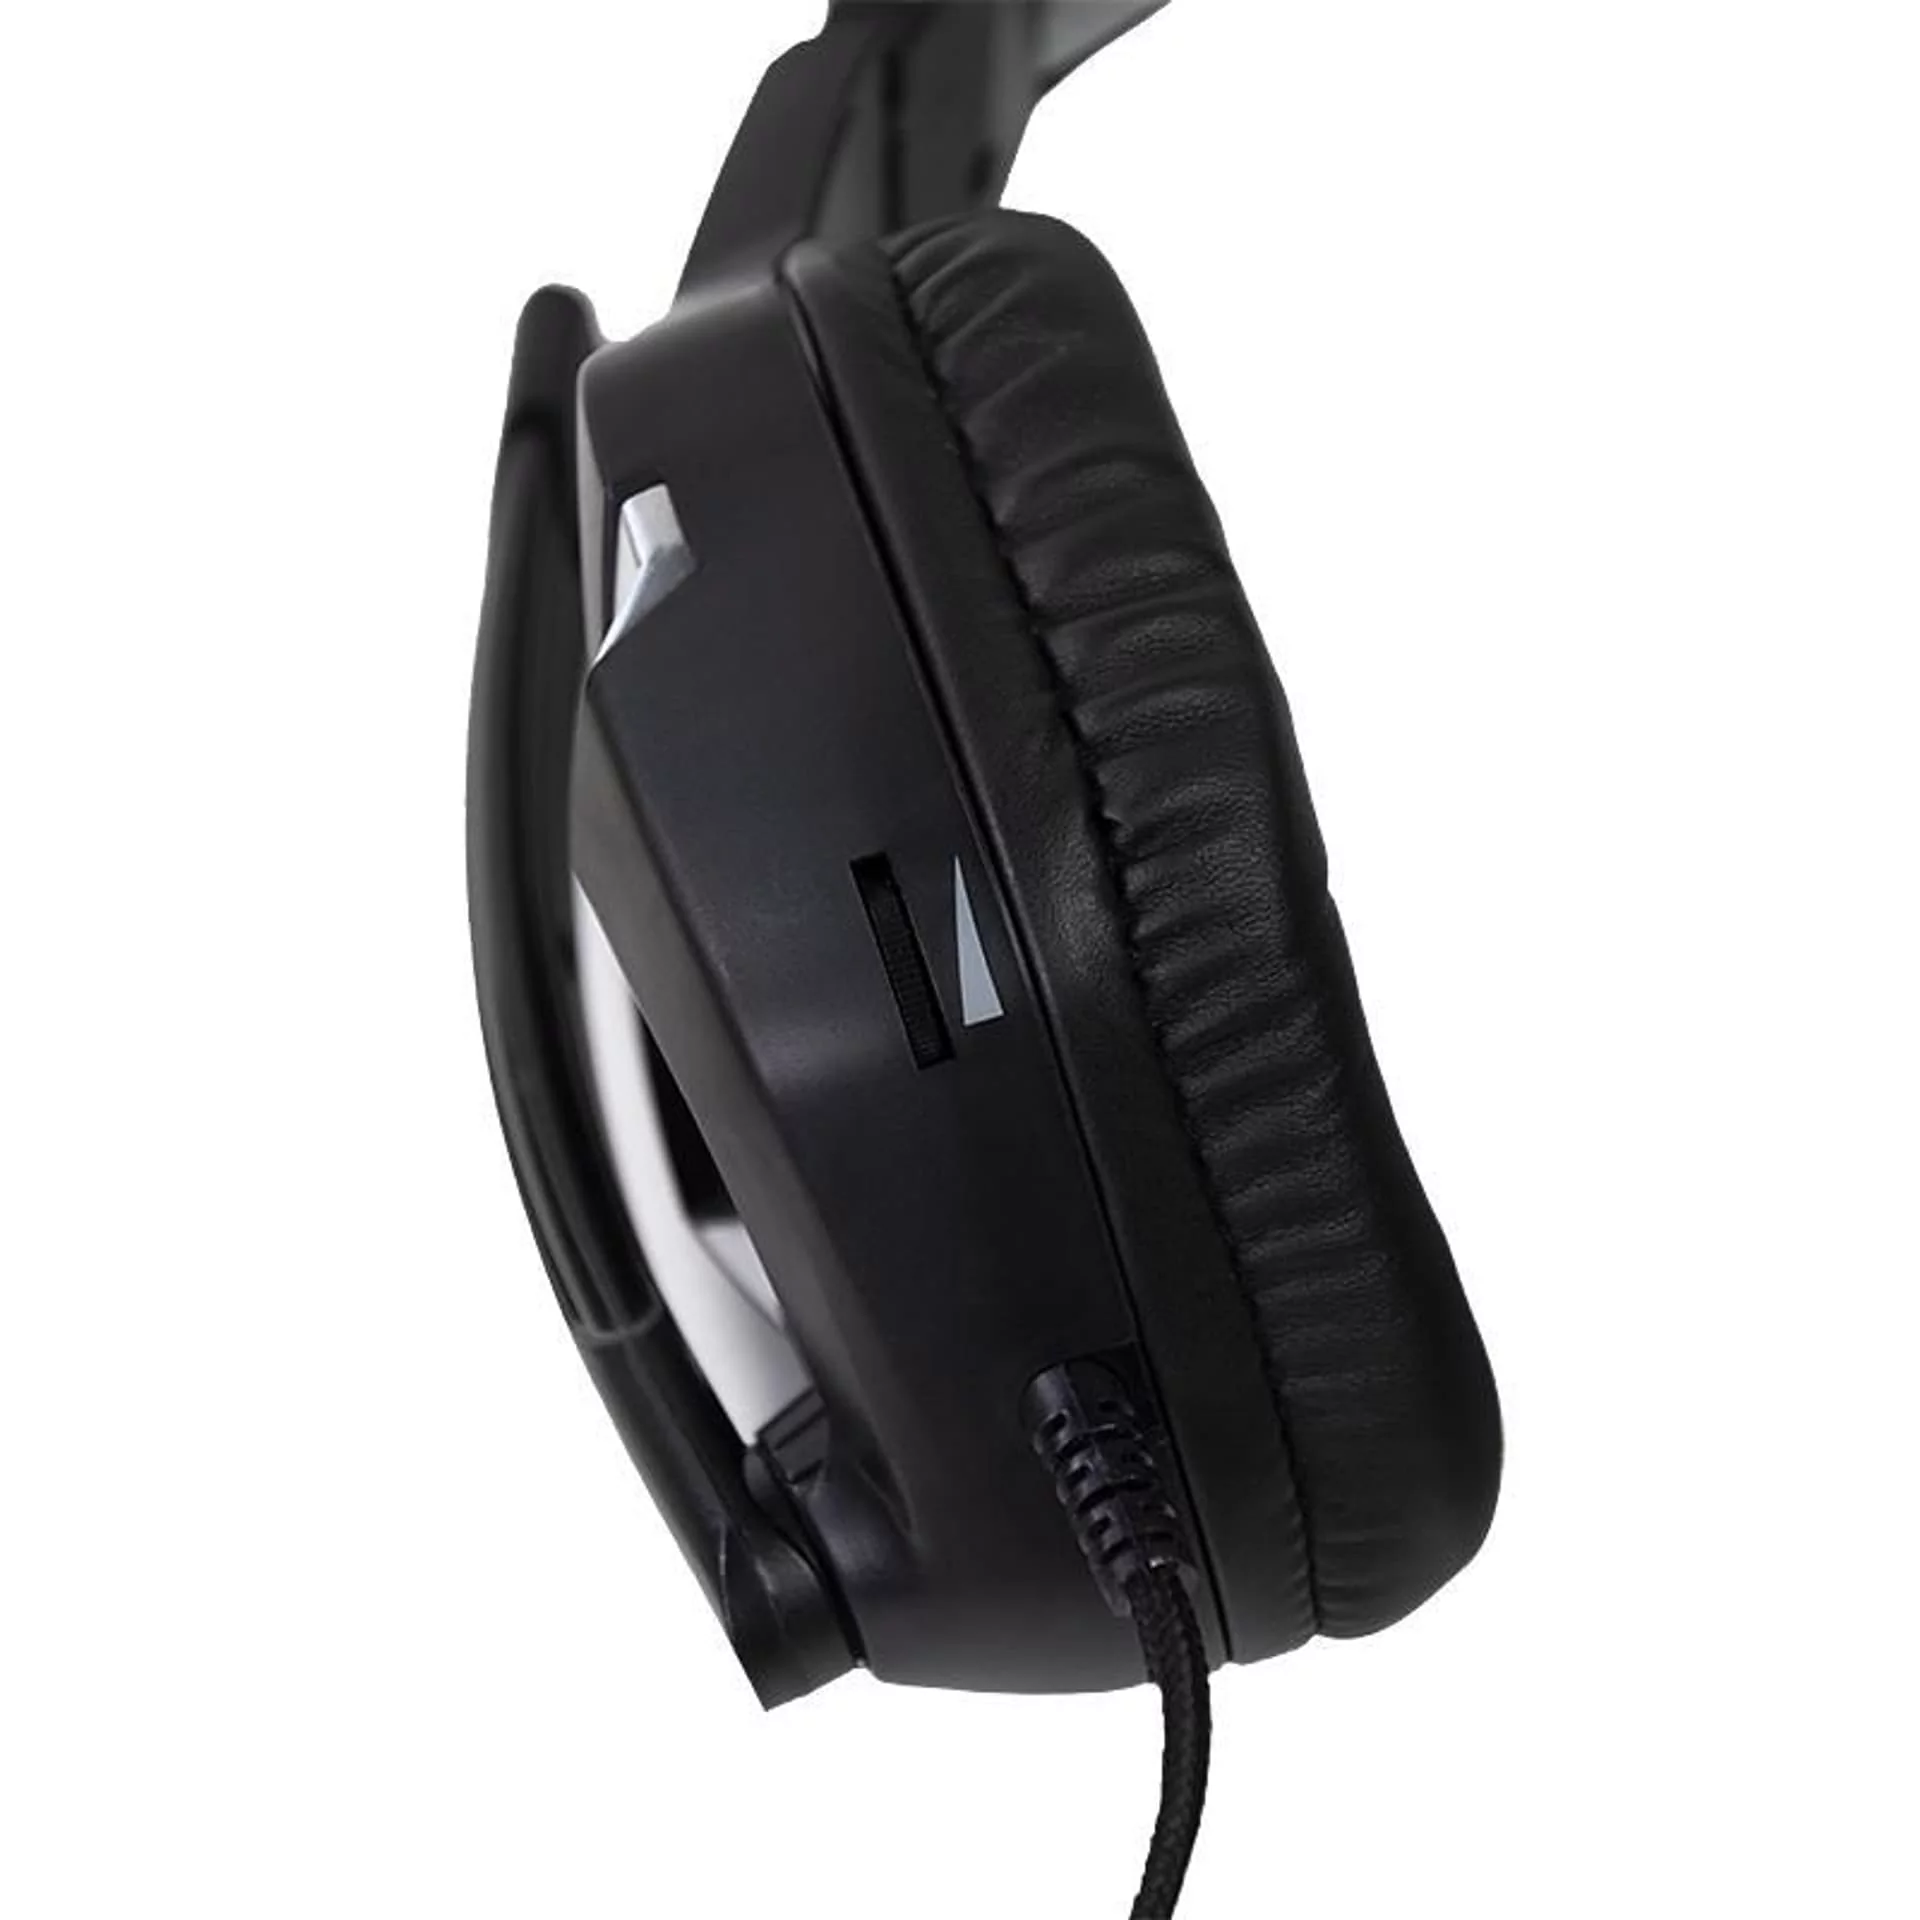 MarWus Wired gaming headset with LED